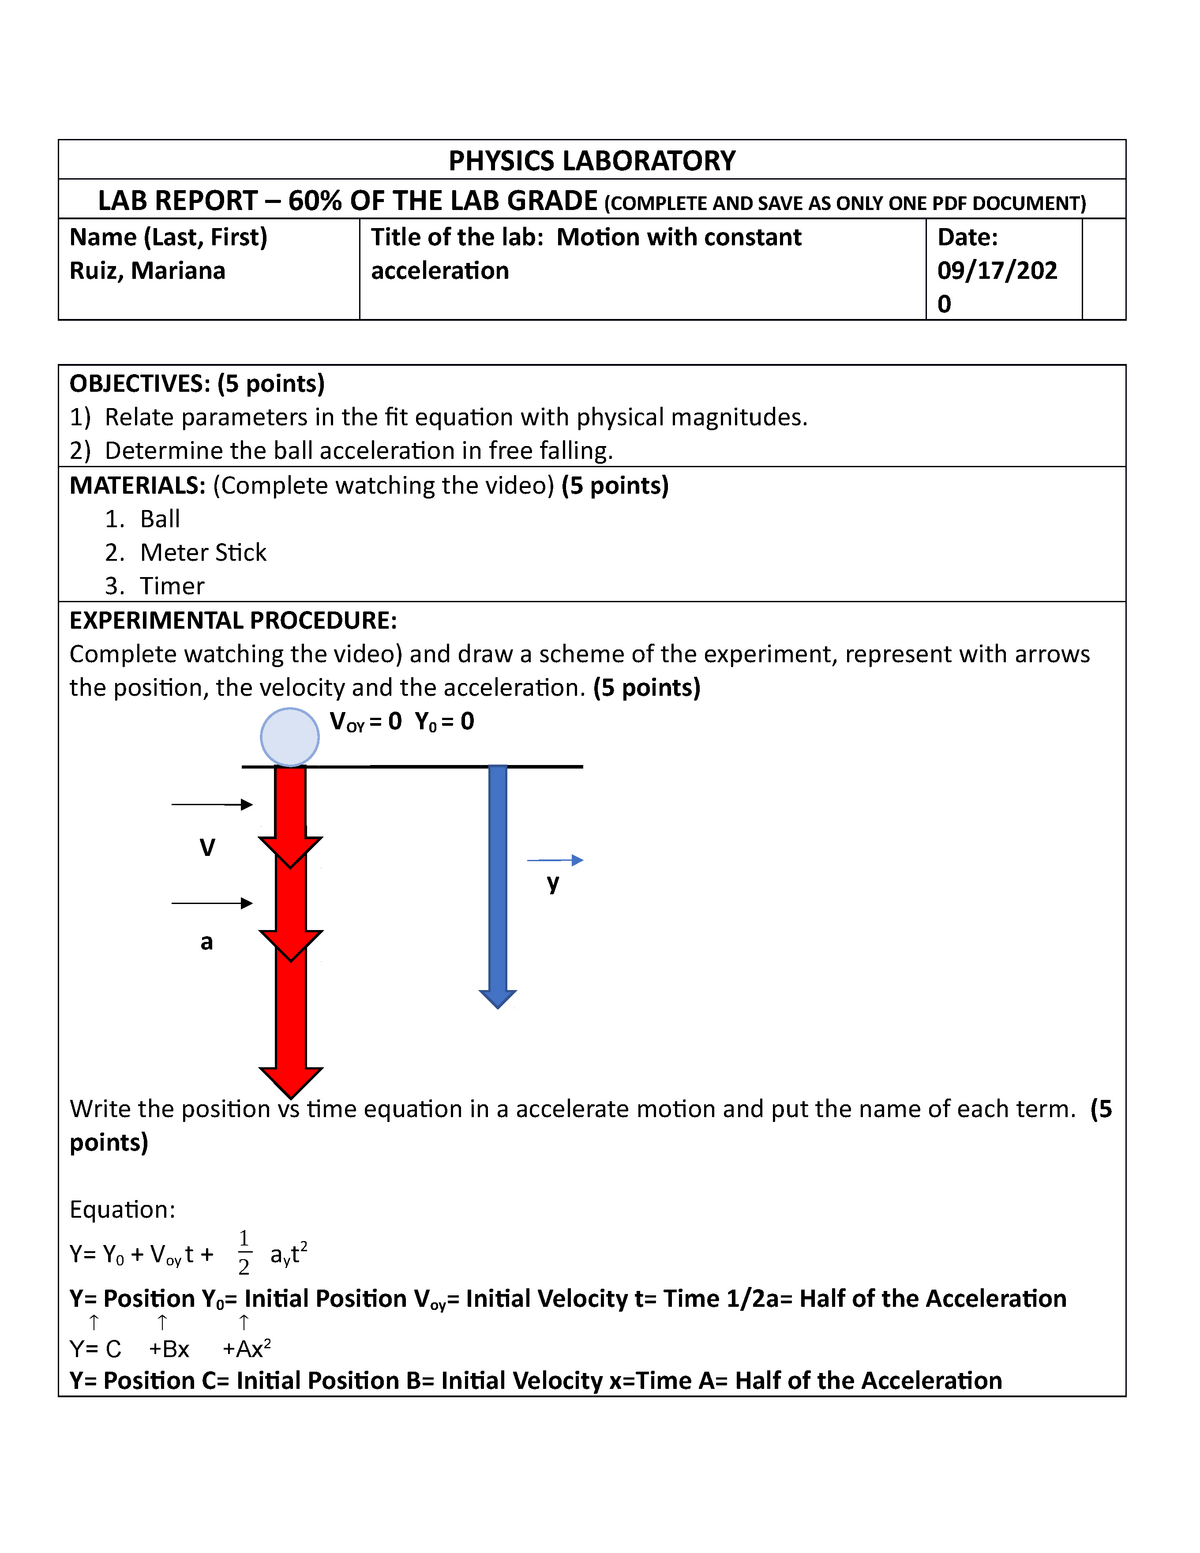 lab motion with constant acceleration assignment lab report brainly